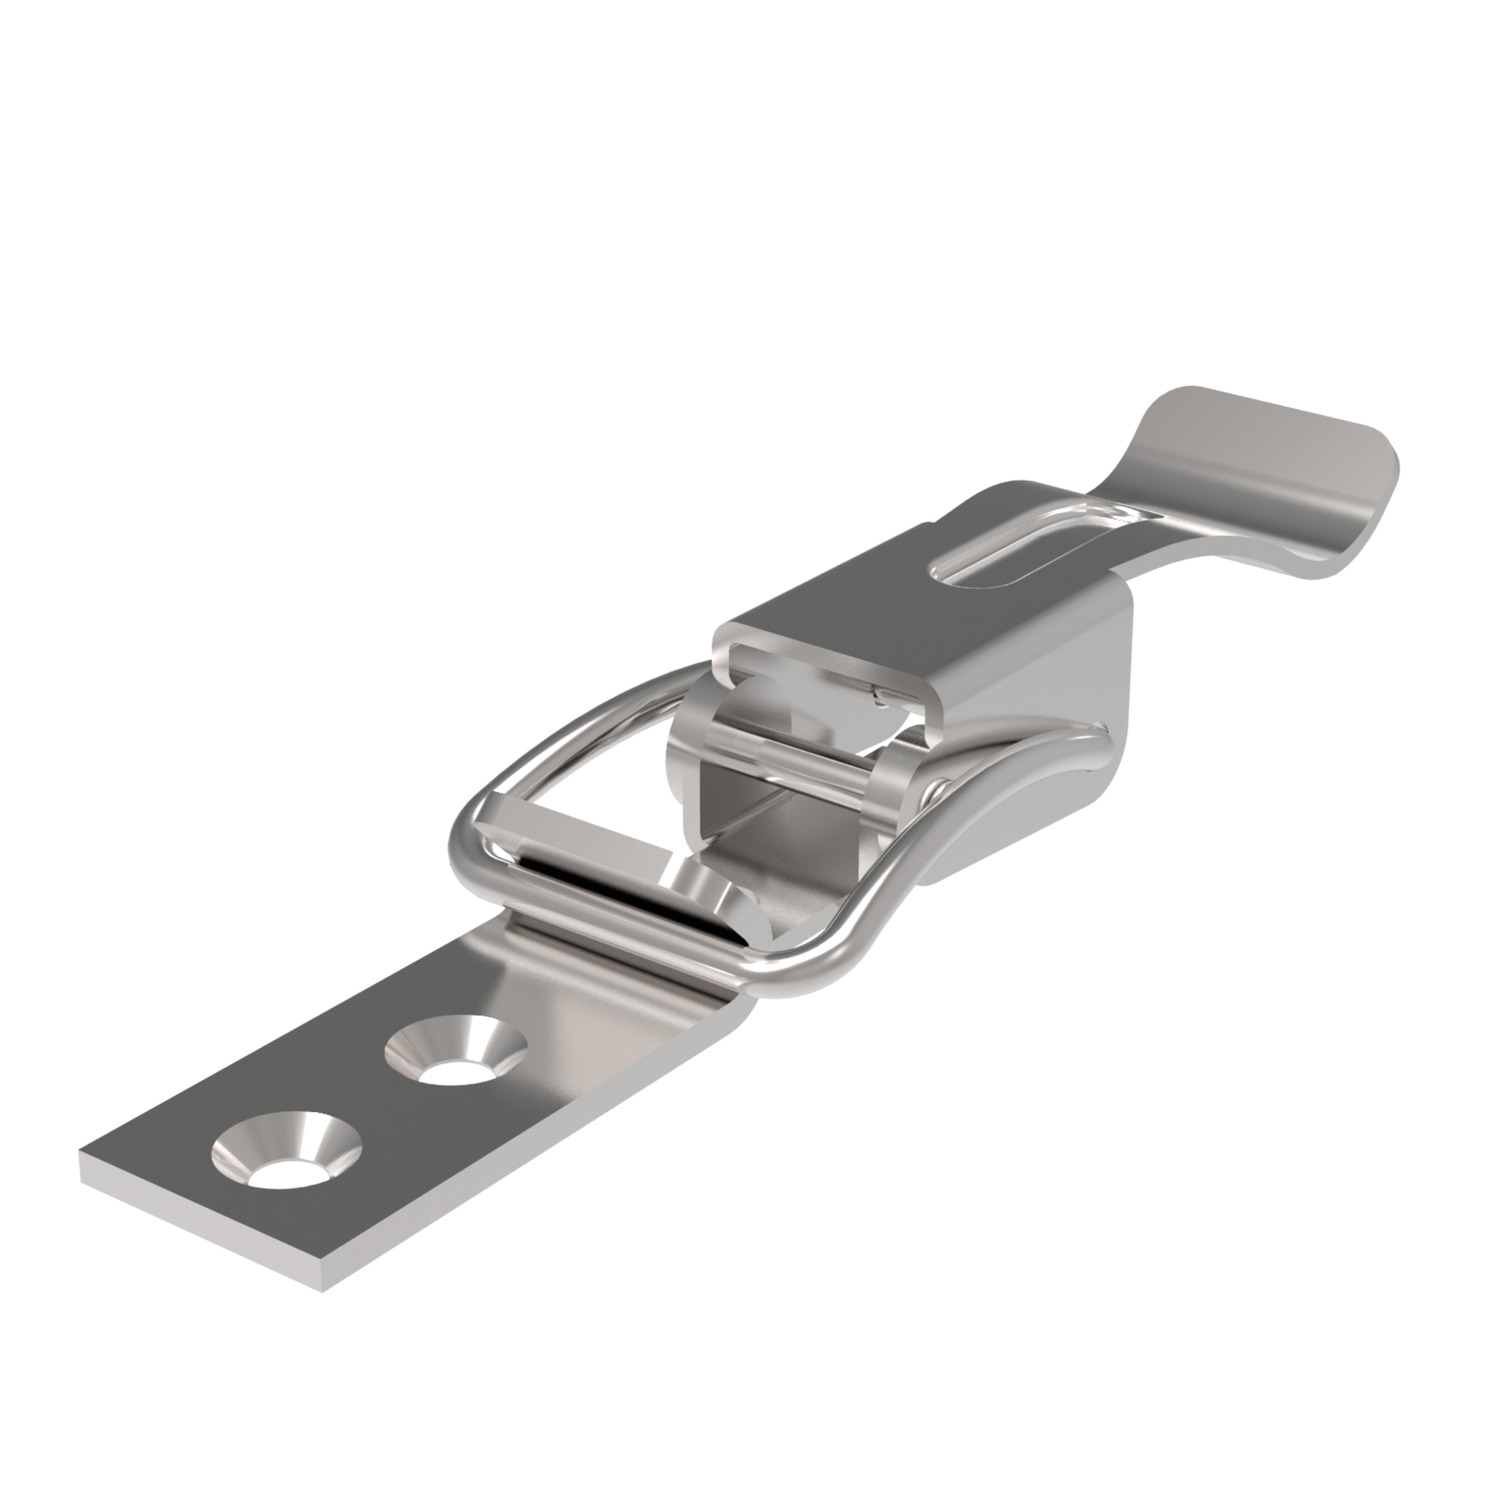 J0434.AC0004 Toggle Latches Zinc plated steel - 76,5 - 10,7 - 21